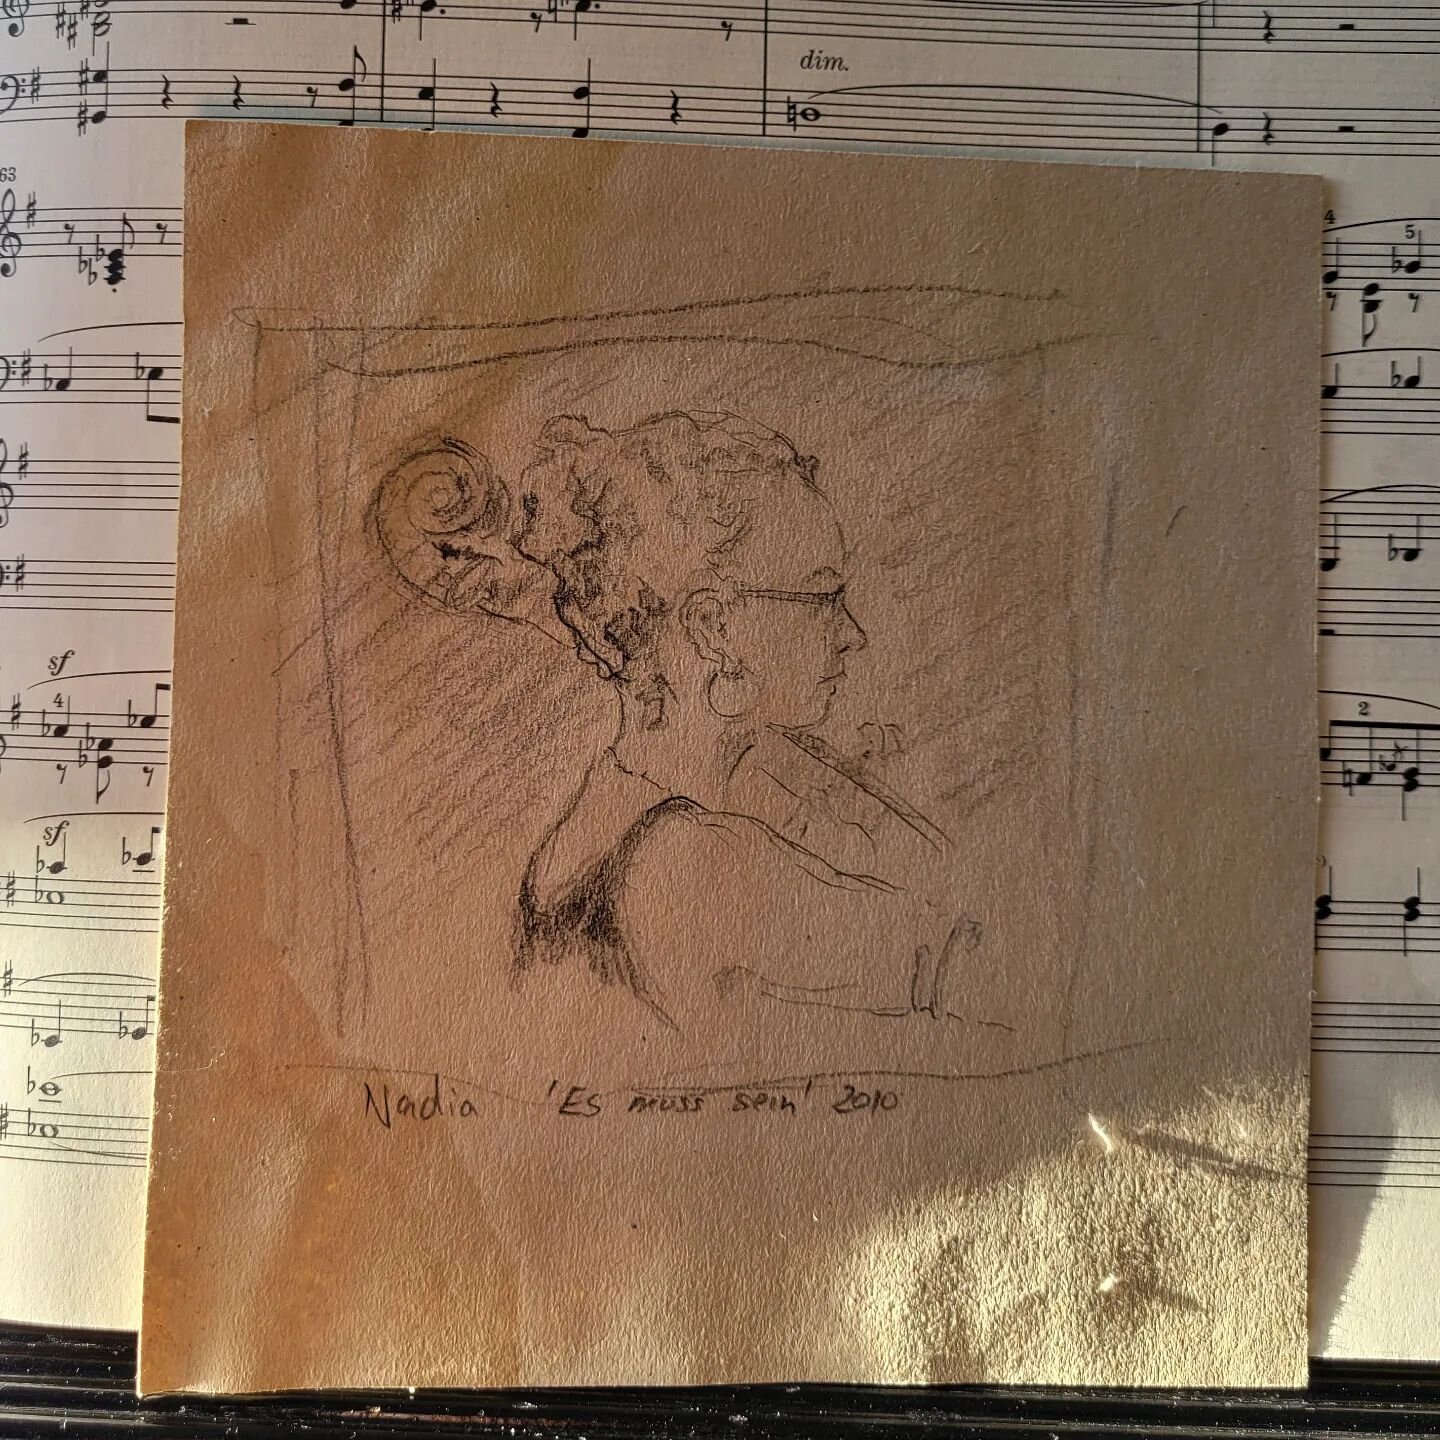 A souvenir from 2010. This slipped out from some music I clearly hadn't opened in 13 years (!). 21 years old and playing the cello during a summer chamber music course named &quot;Es Muss Sein&quot; after Beethoven. A serendipitous re-discovery when 